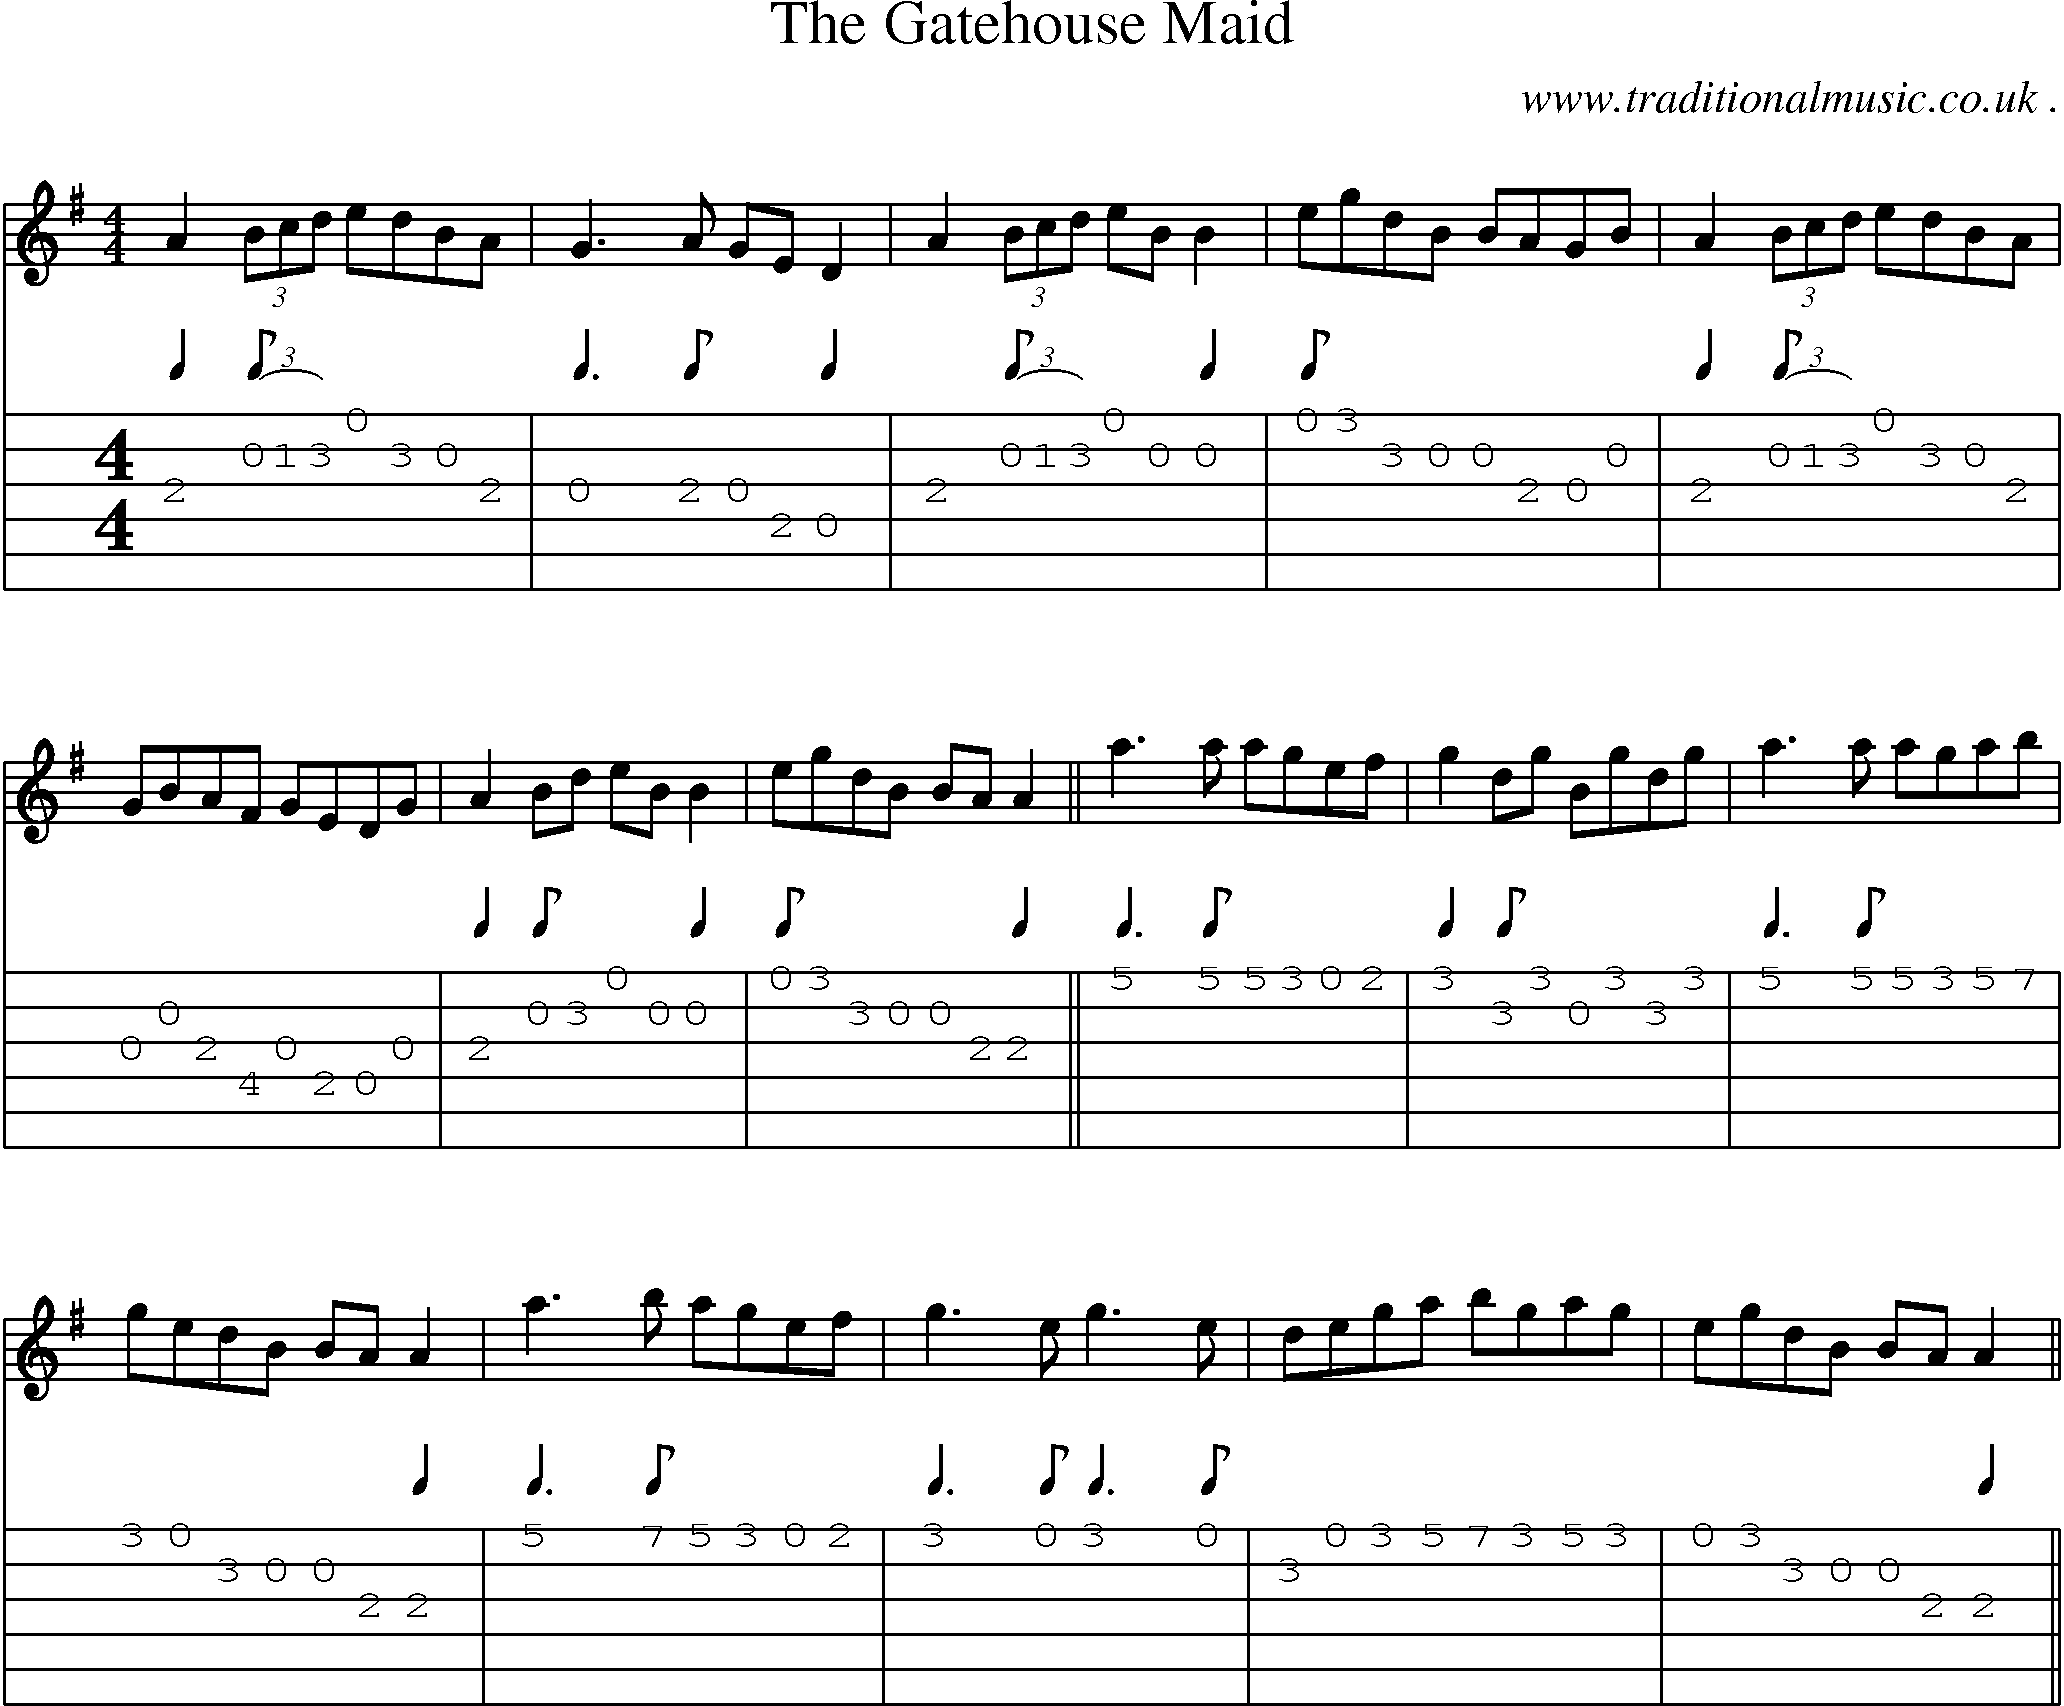 Sheet-Music and Guitar Tabs for The Gatehouse Maid